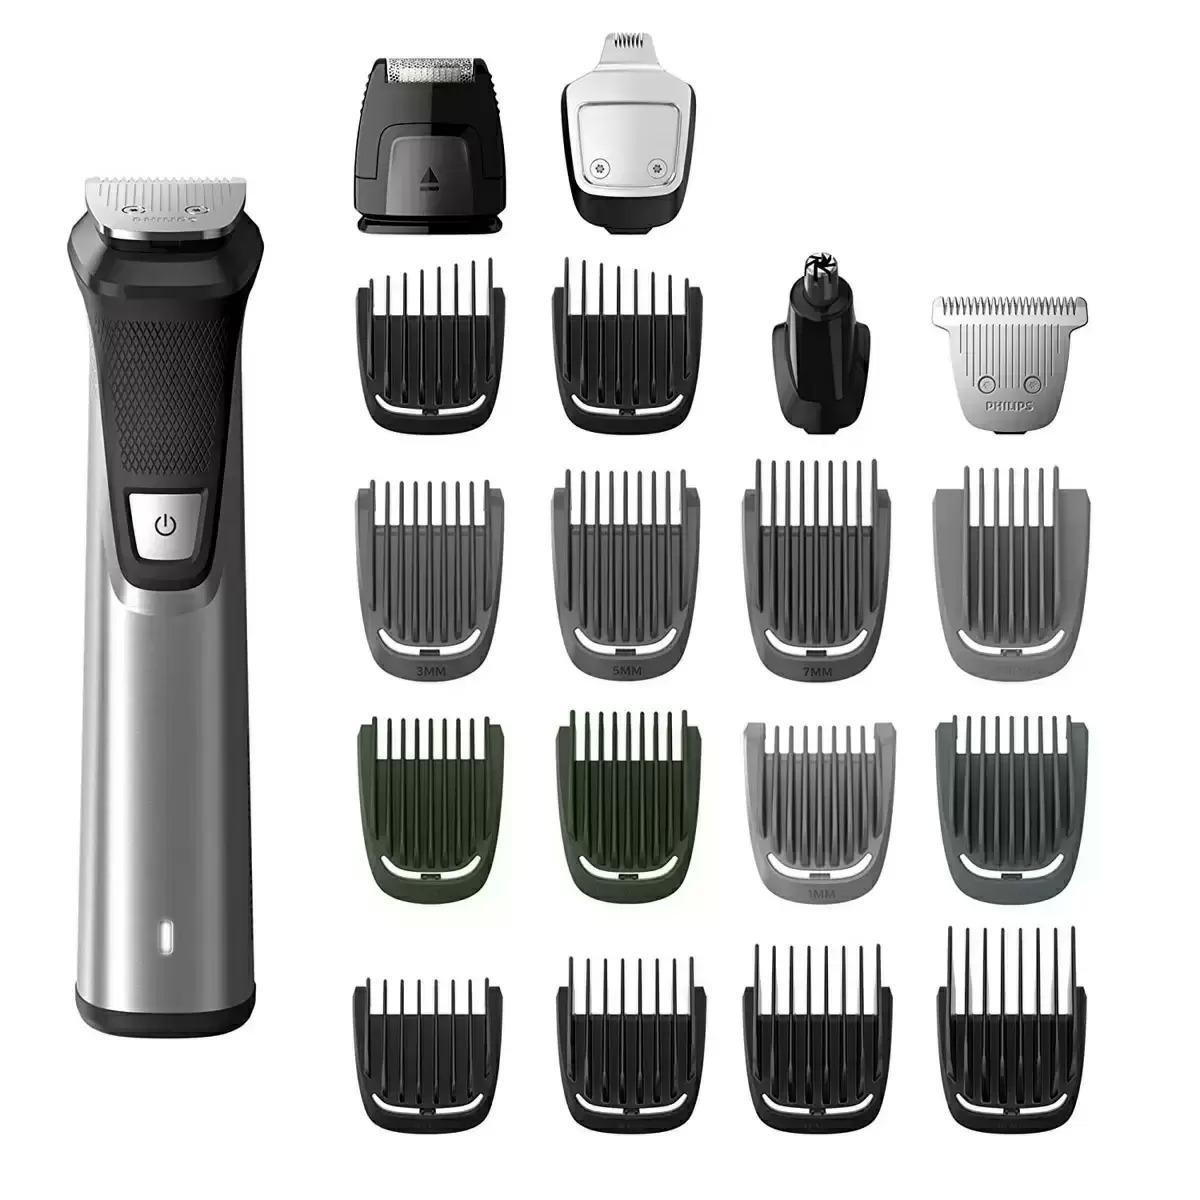 Philips Norelco MG7750 49 Multigroom Series 7000 Grooming Kit for $34.83 Shipped